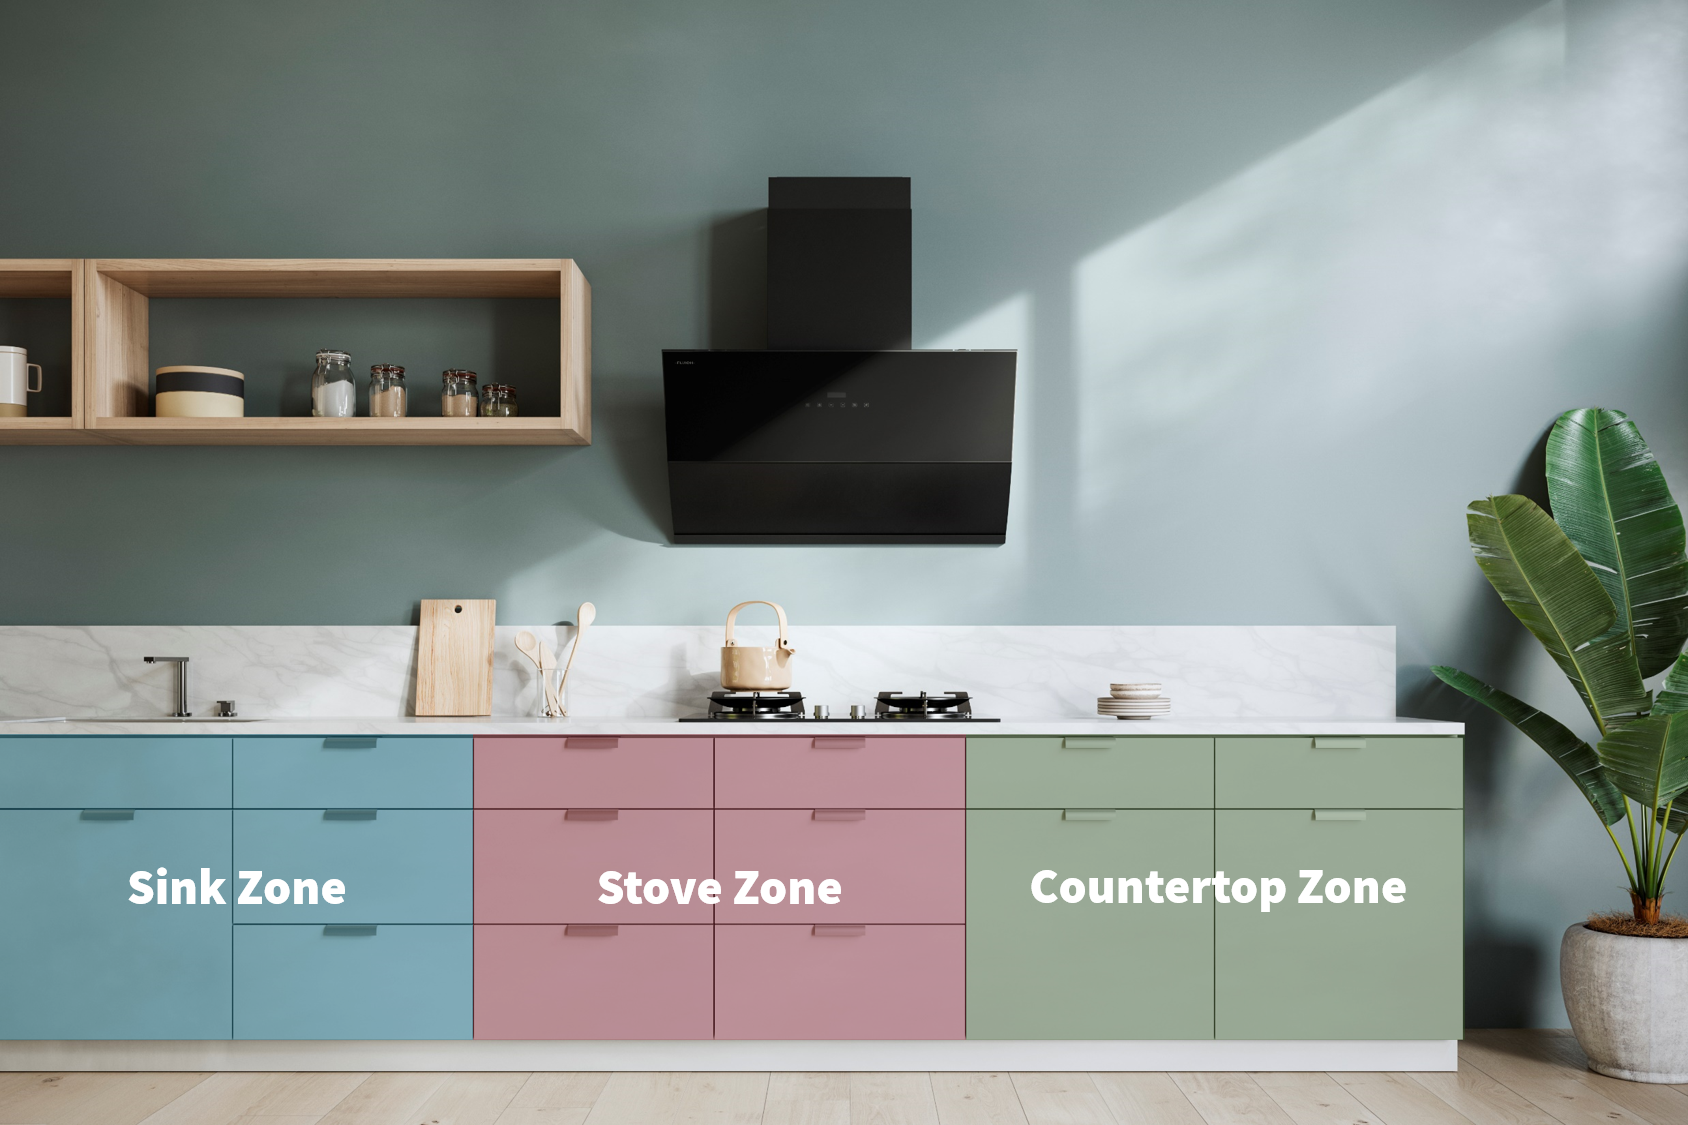 The fundamental concepts: Divide the kitchen area into zones and group items according to their frequency of use